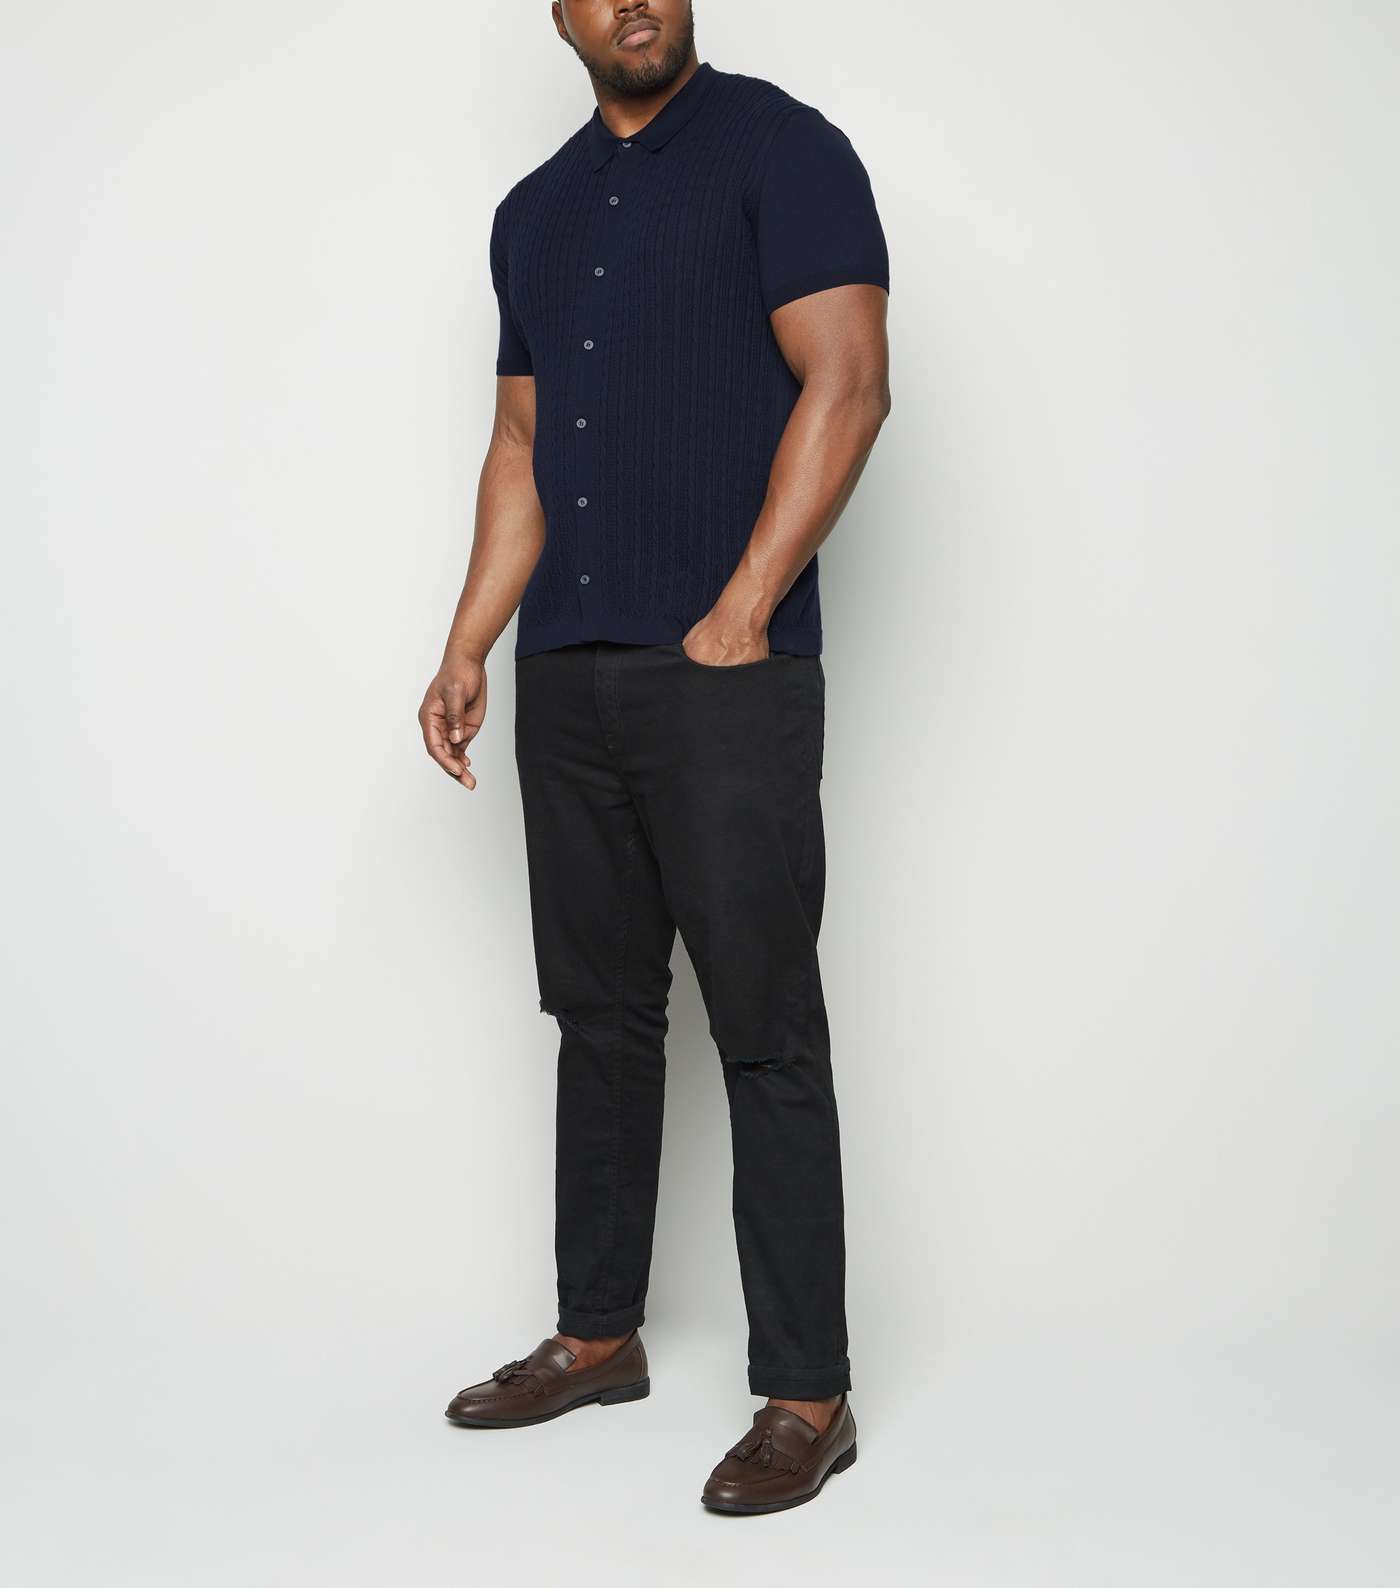 Plus Size Navy Cable Knit Polo Shirt Image 2